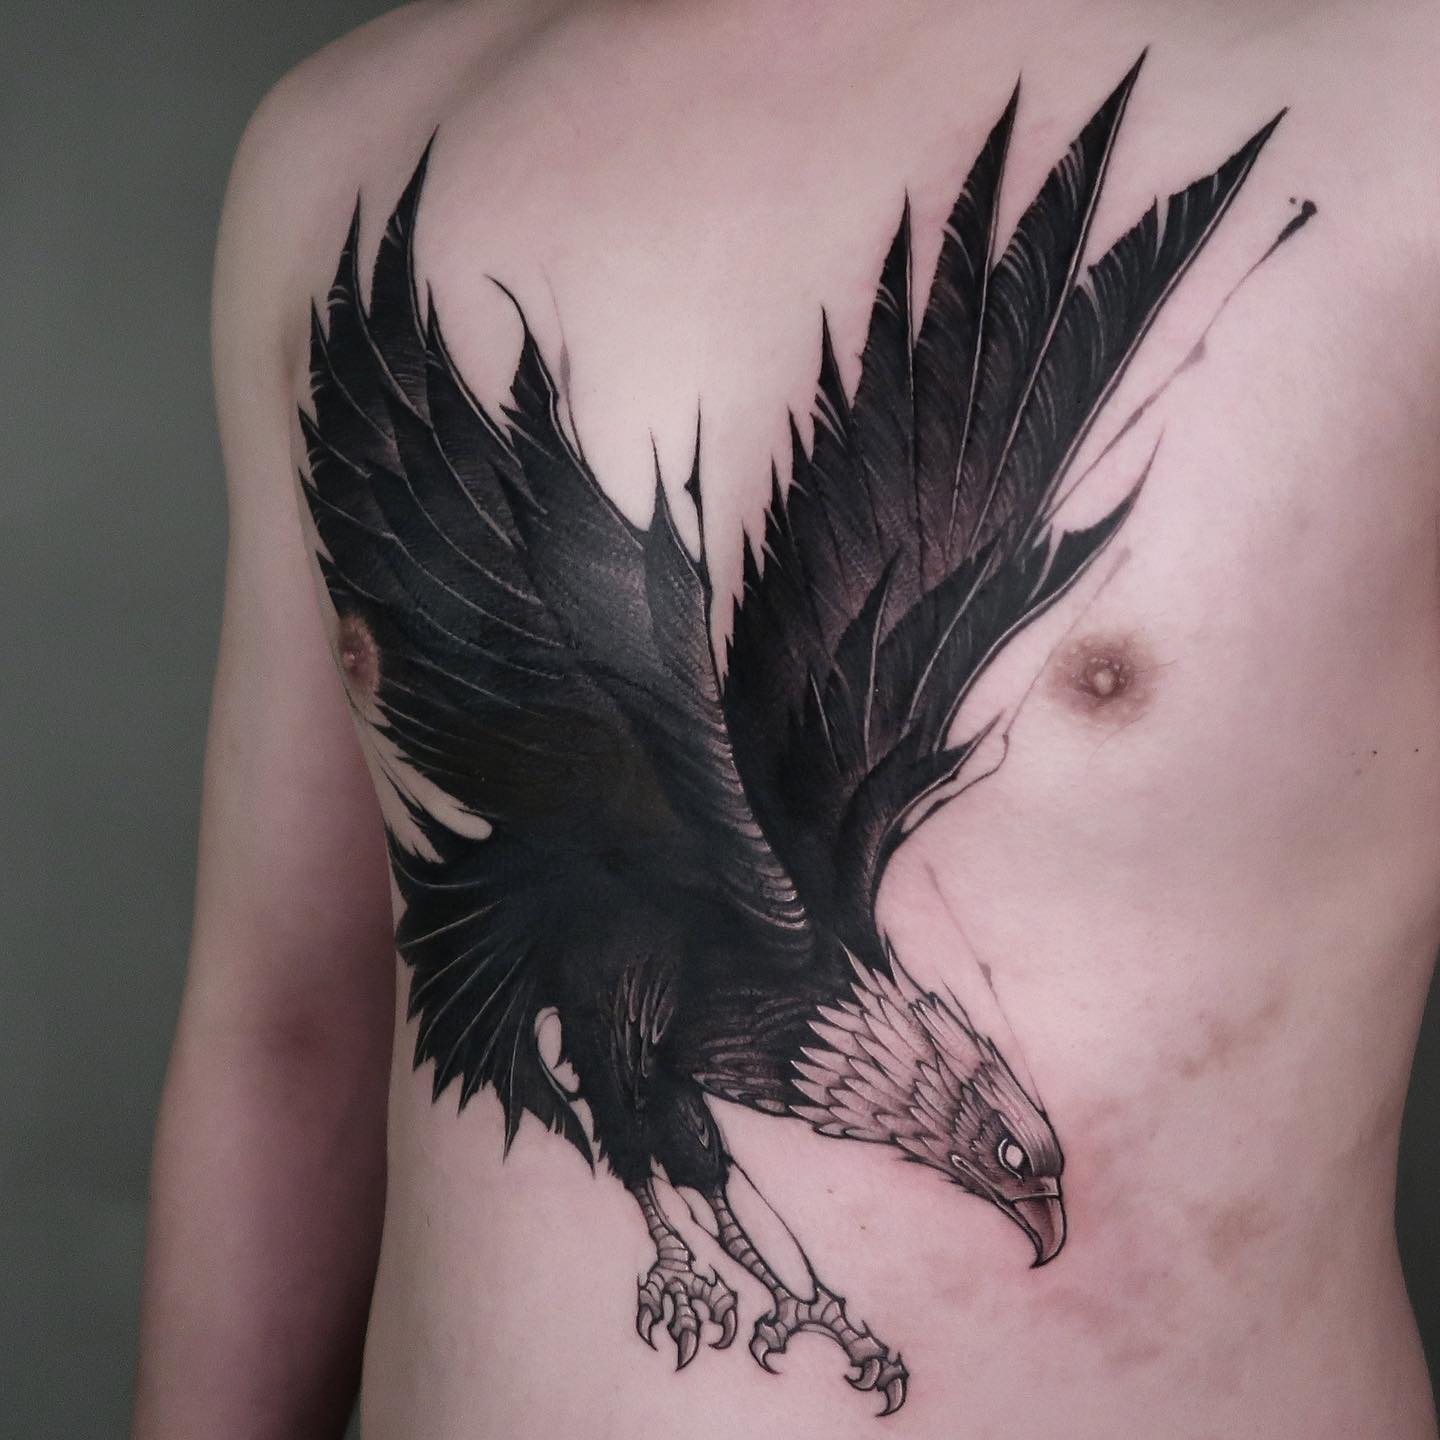 Flying eagle tattoo by 1.0